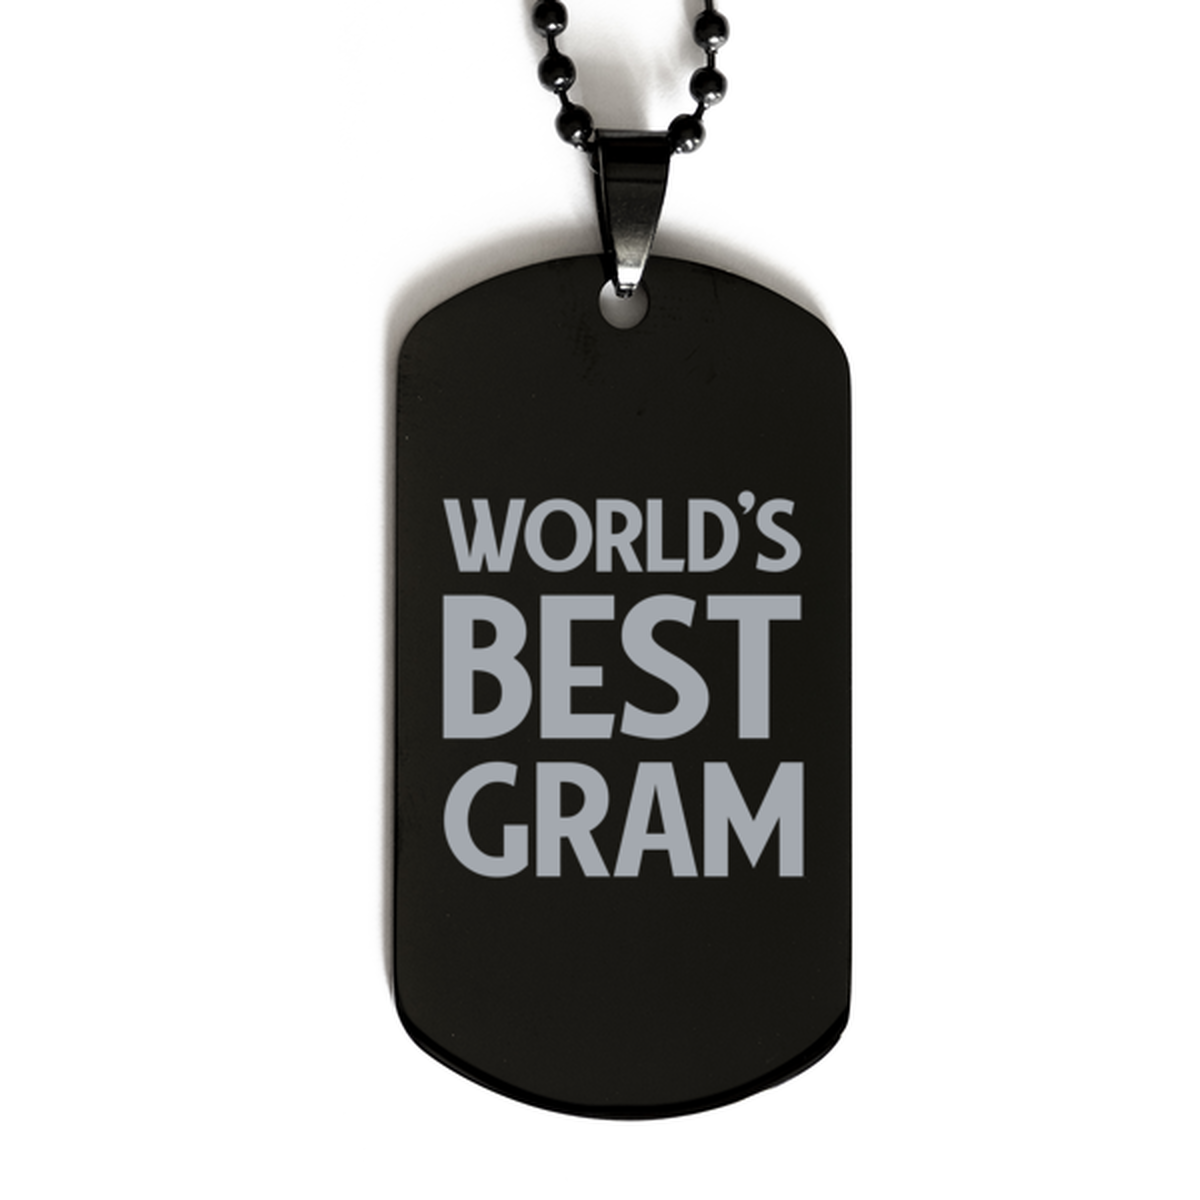 Worlds Best Gram Gifts, Funny Black Engraved Dog Tag For Gram, Birthday Presents For Women